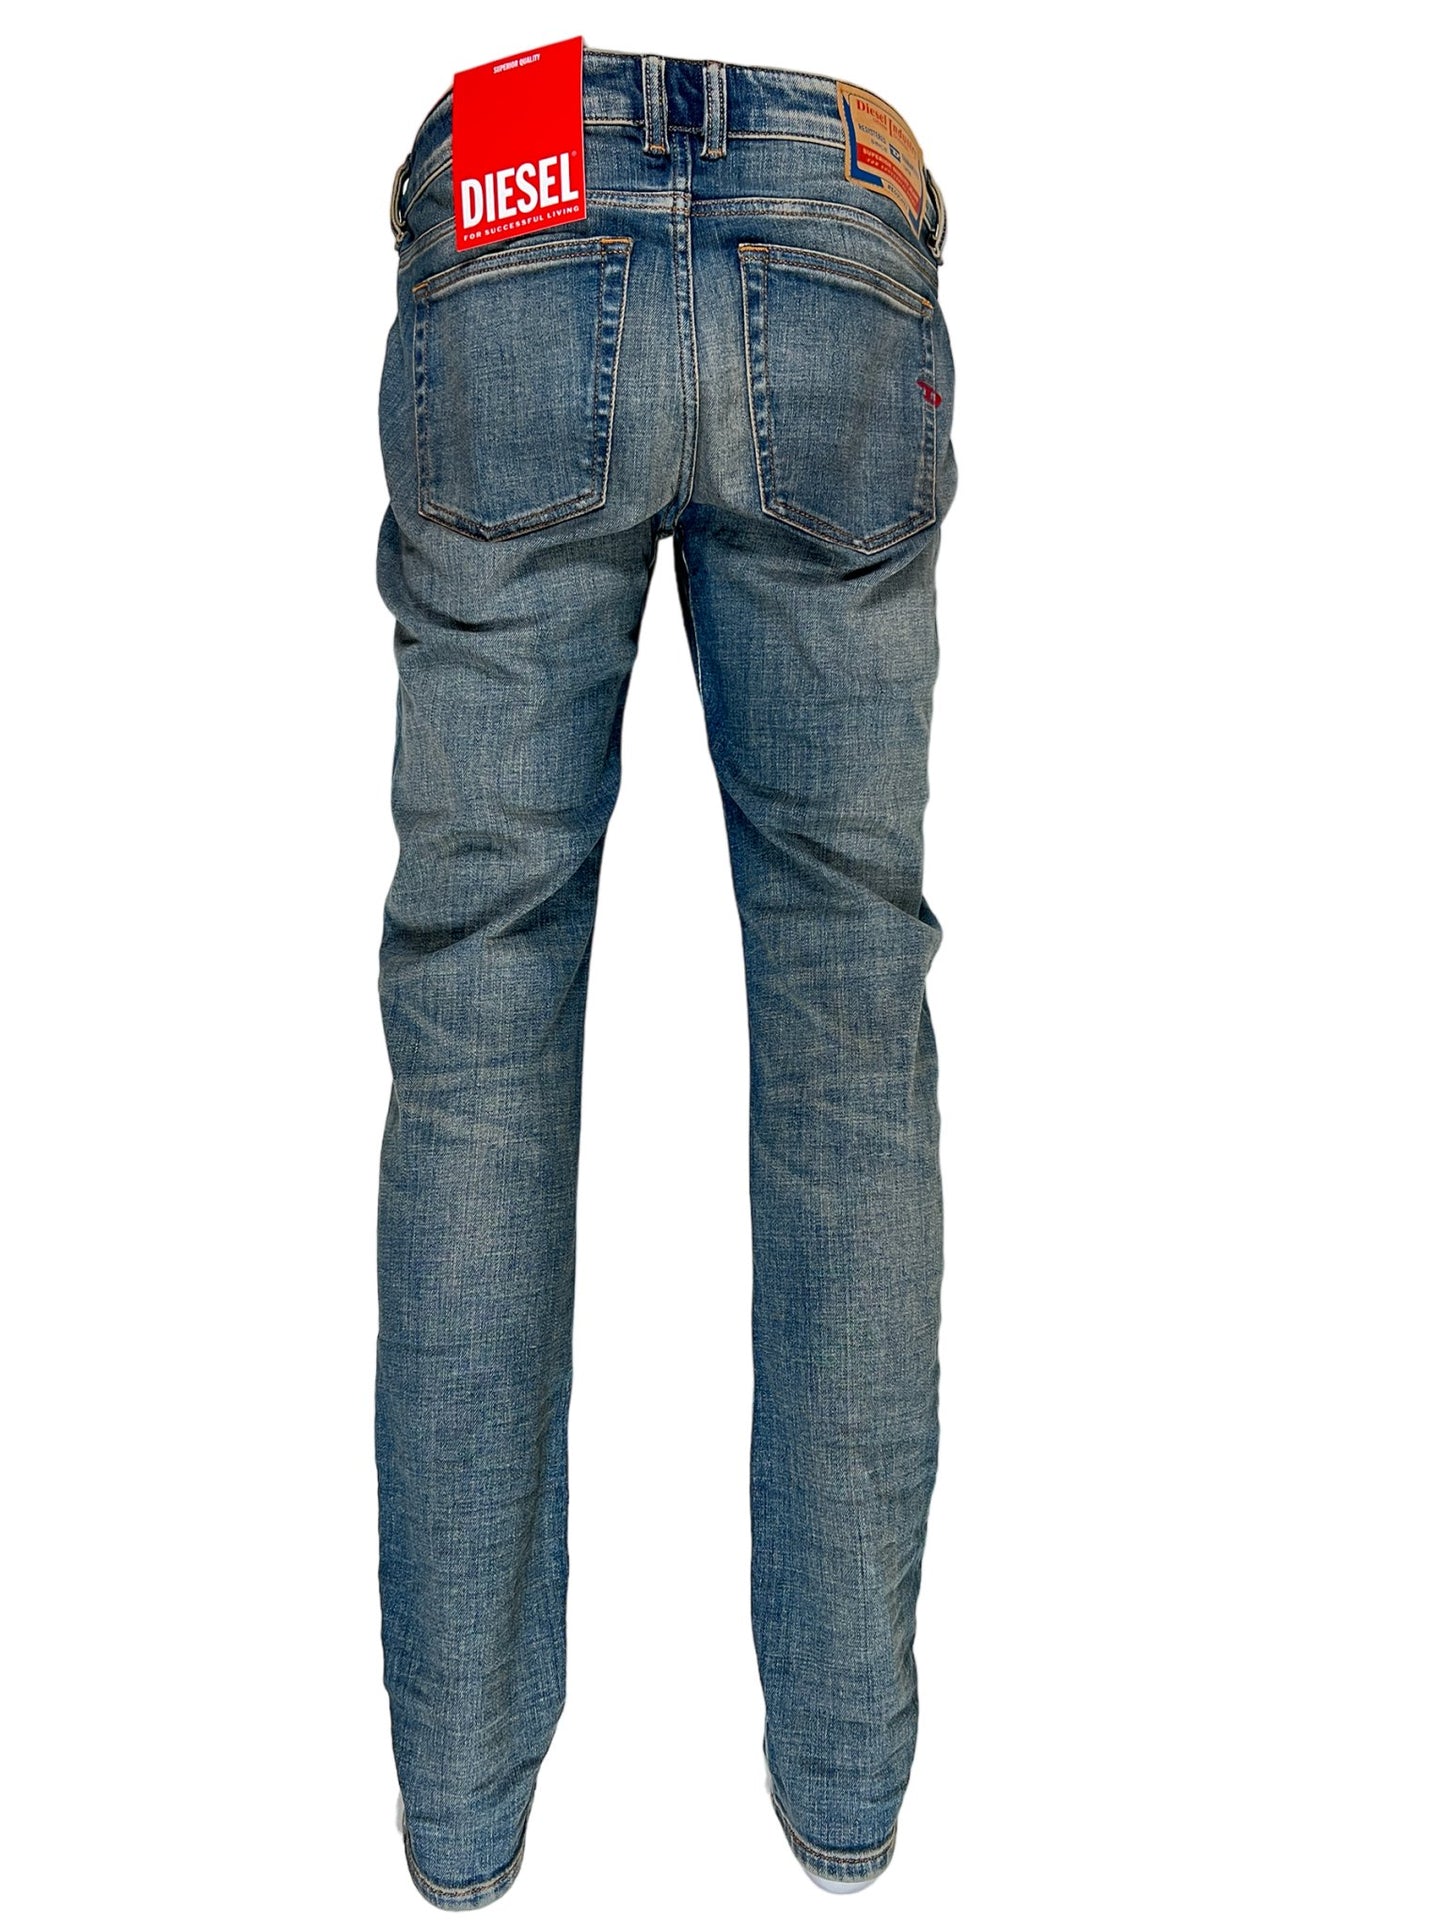 A pair of DIESEL 2019 D-STRUKT 9H49 DENIM slim fit jeans with a red tag on the back.